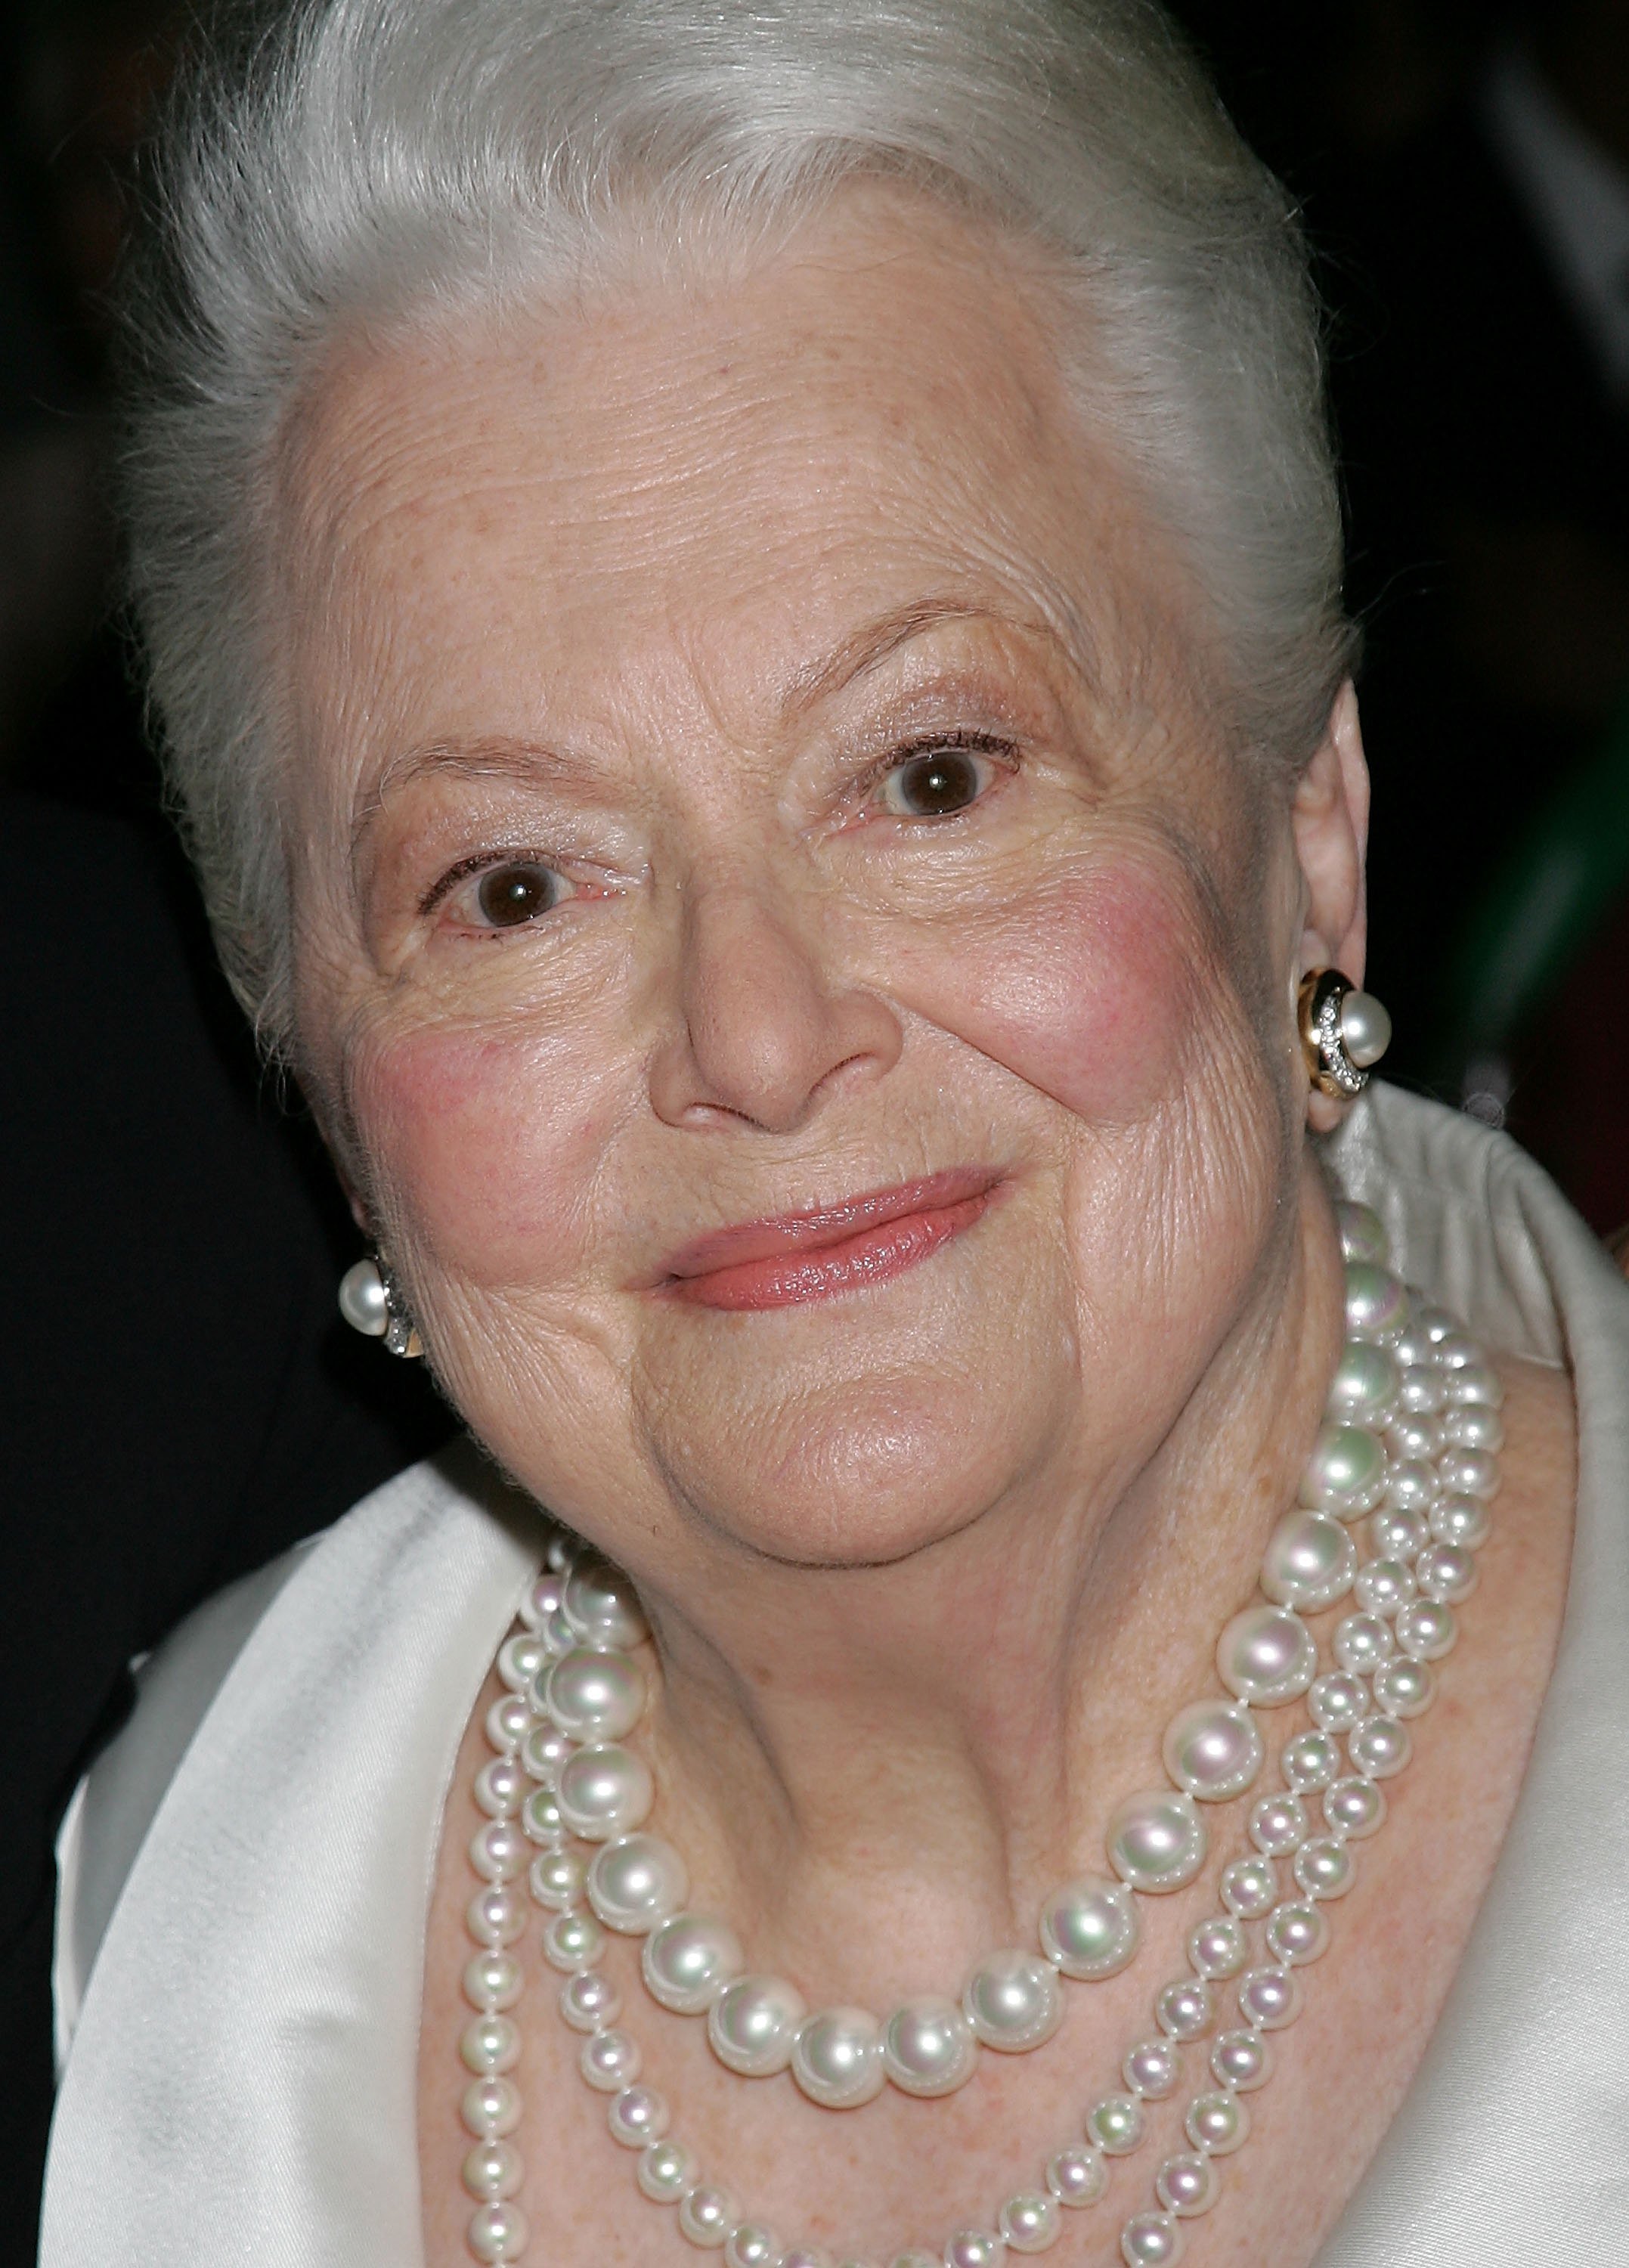 Actress Olivia de Havilland at the Academy of Motion Picture Arts and Sciences' tribute to Ms. de Havilland at the Academy of Motion Picture Arts and Sciences in Beverly Hills, California | Photo: David Livingston/Getty Images